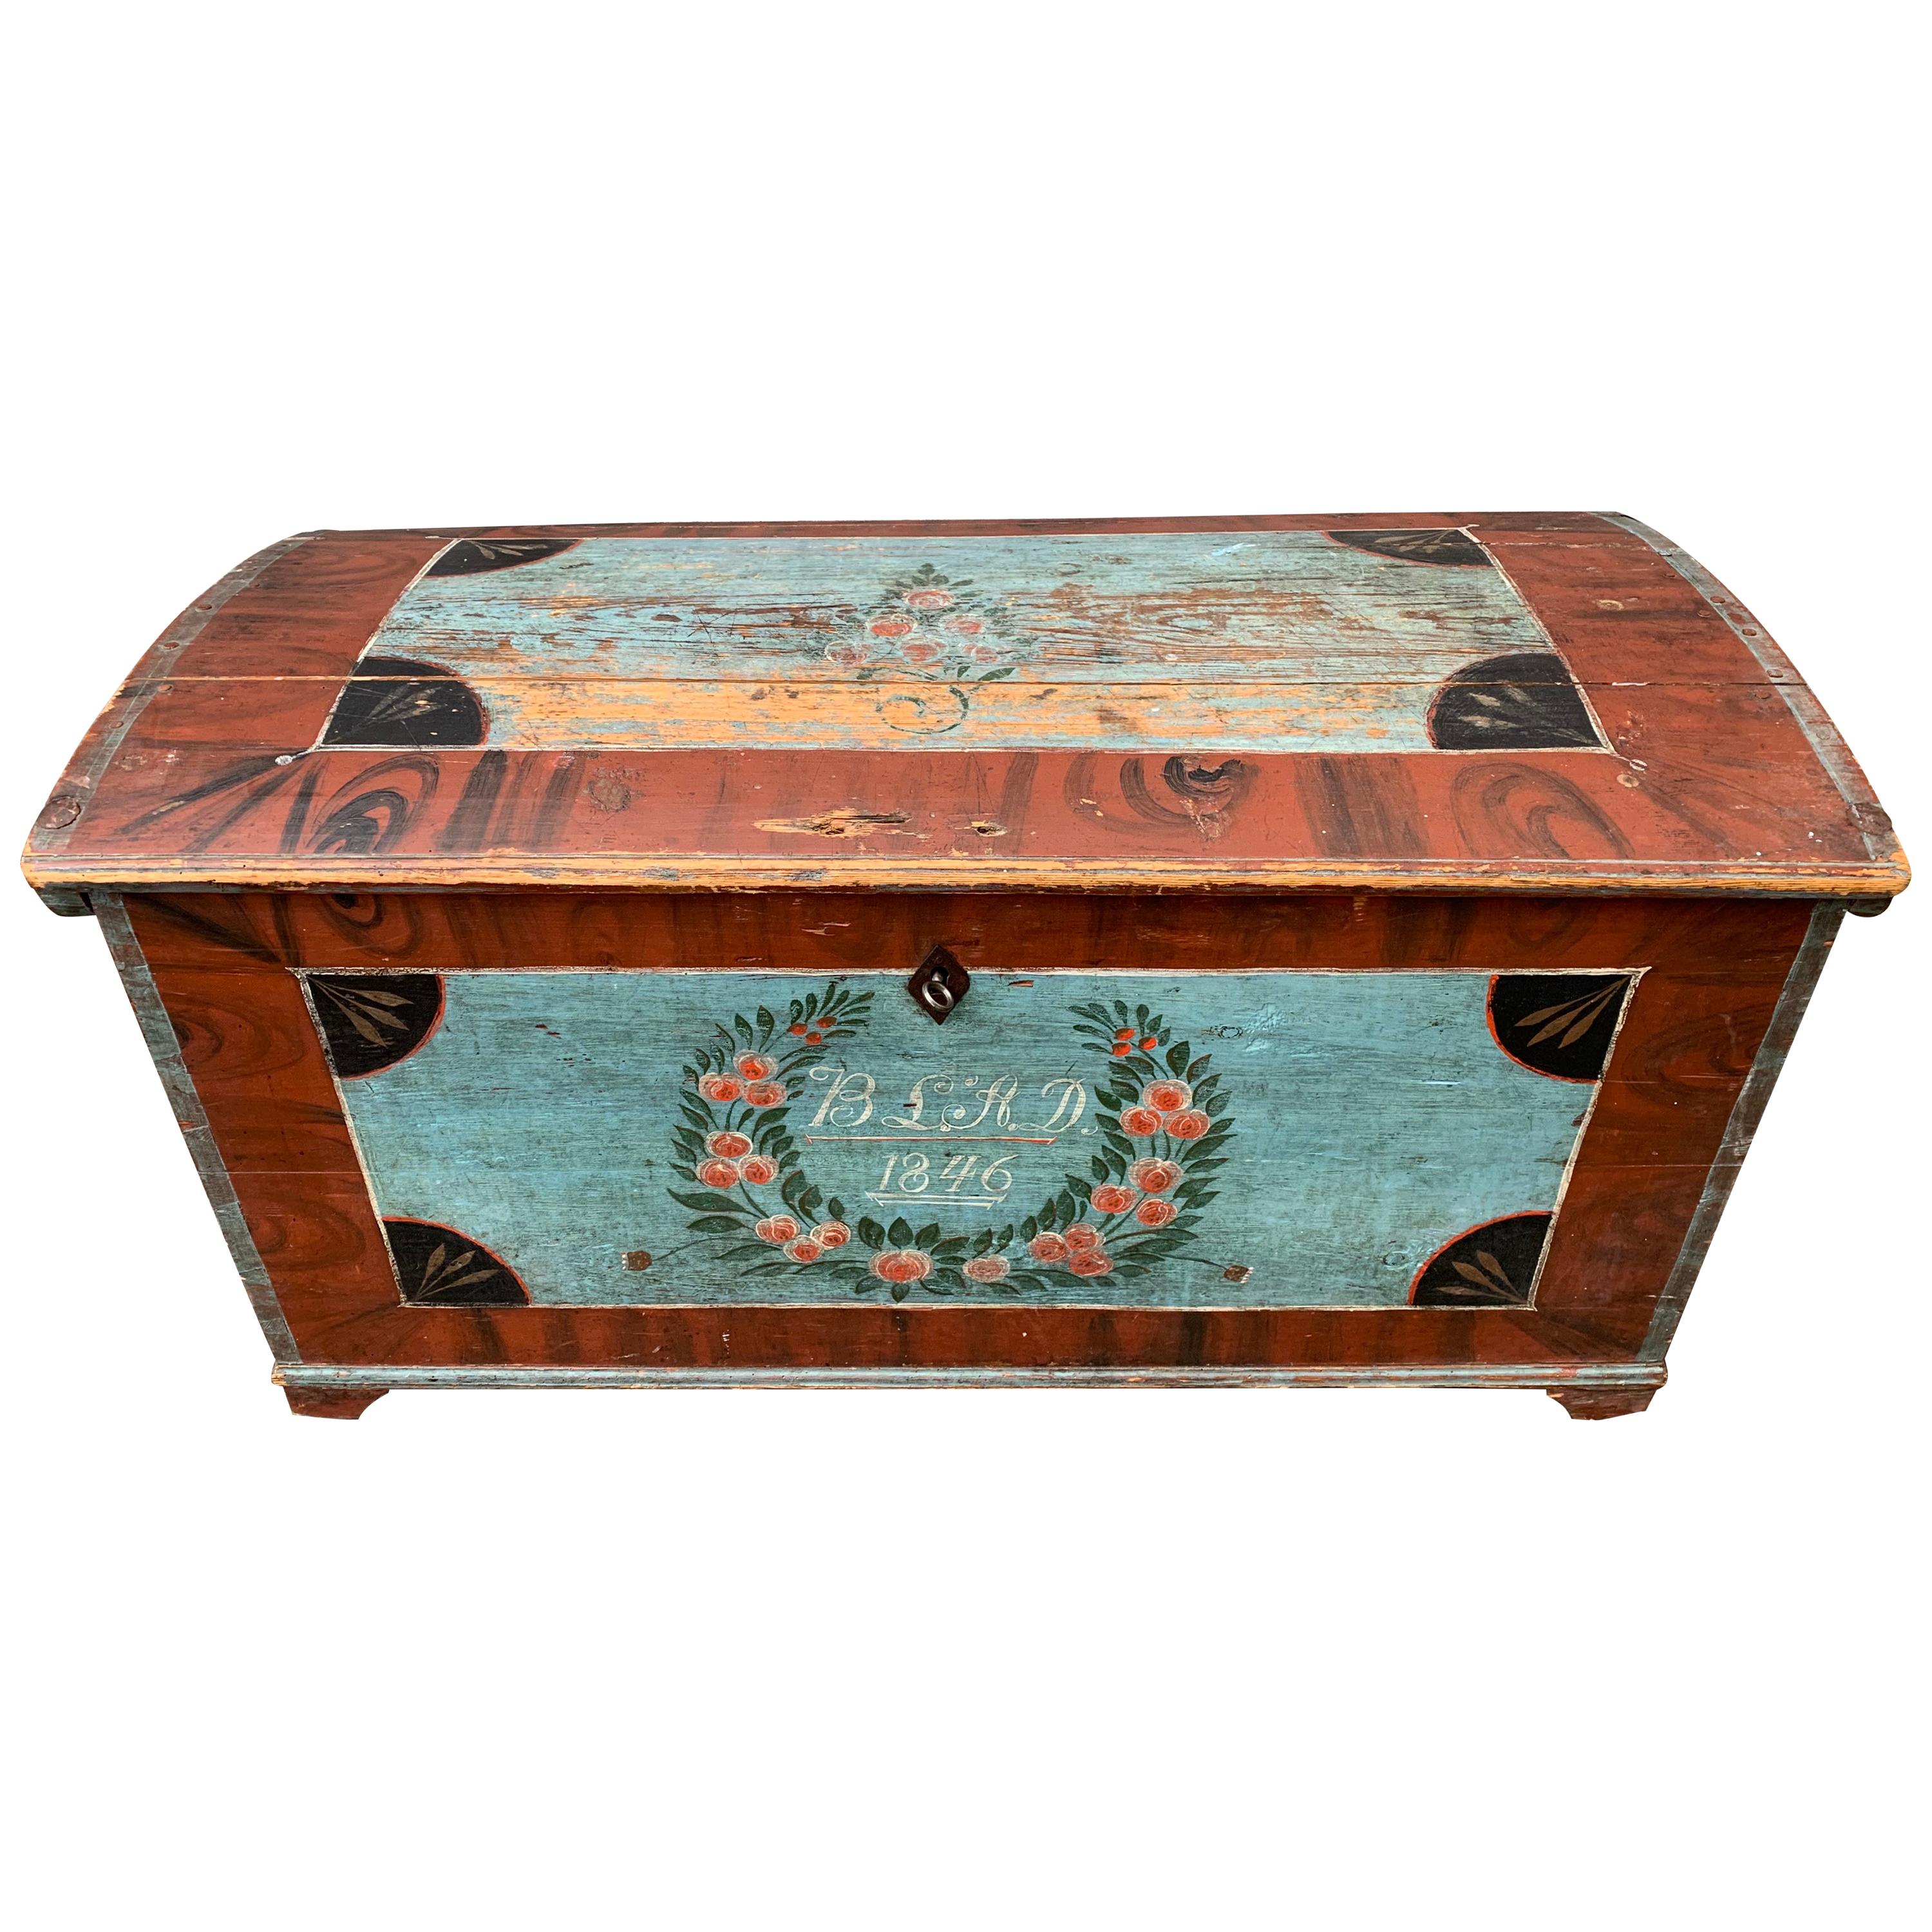 Swedish 19th Century Original Painted Dome-Top Wedding Trunk, Dated 1846